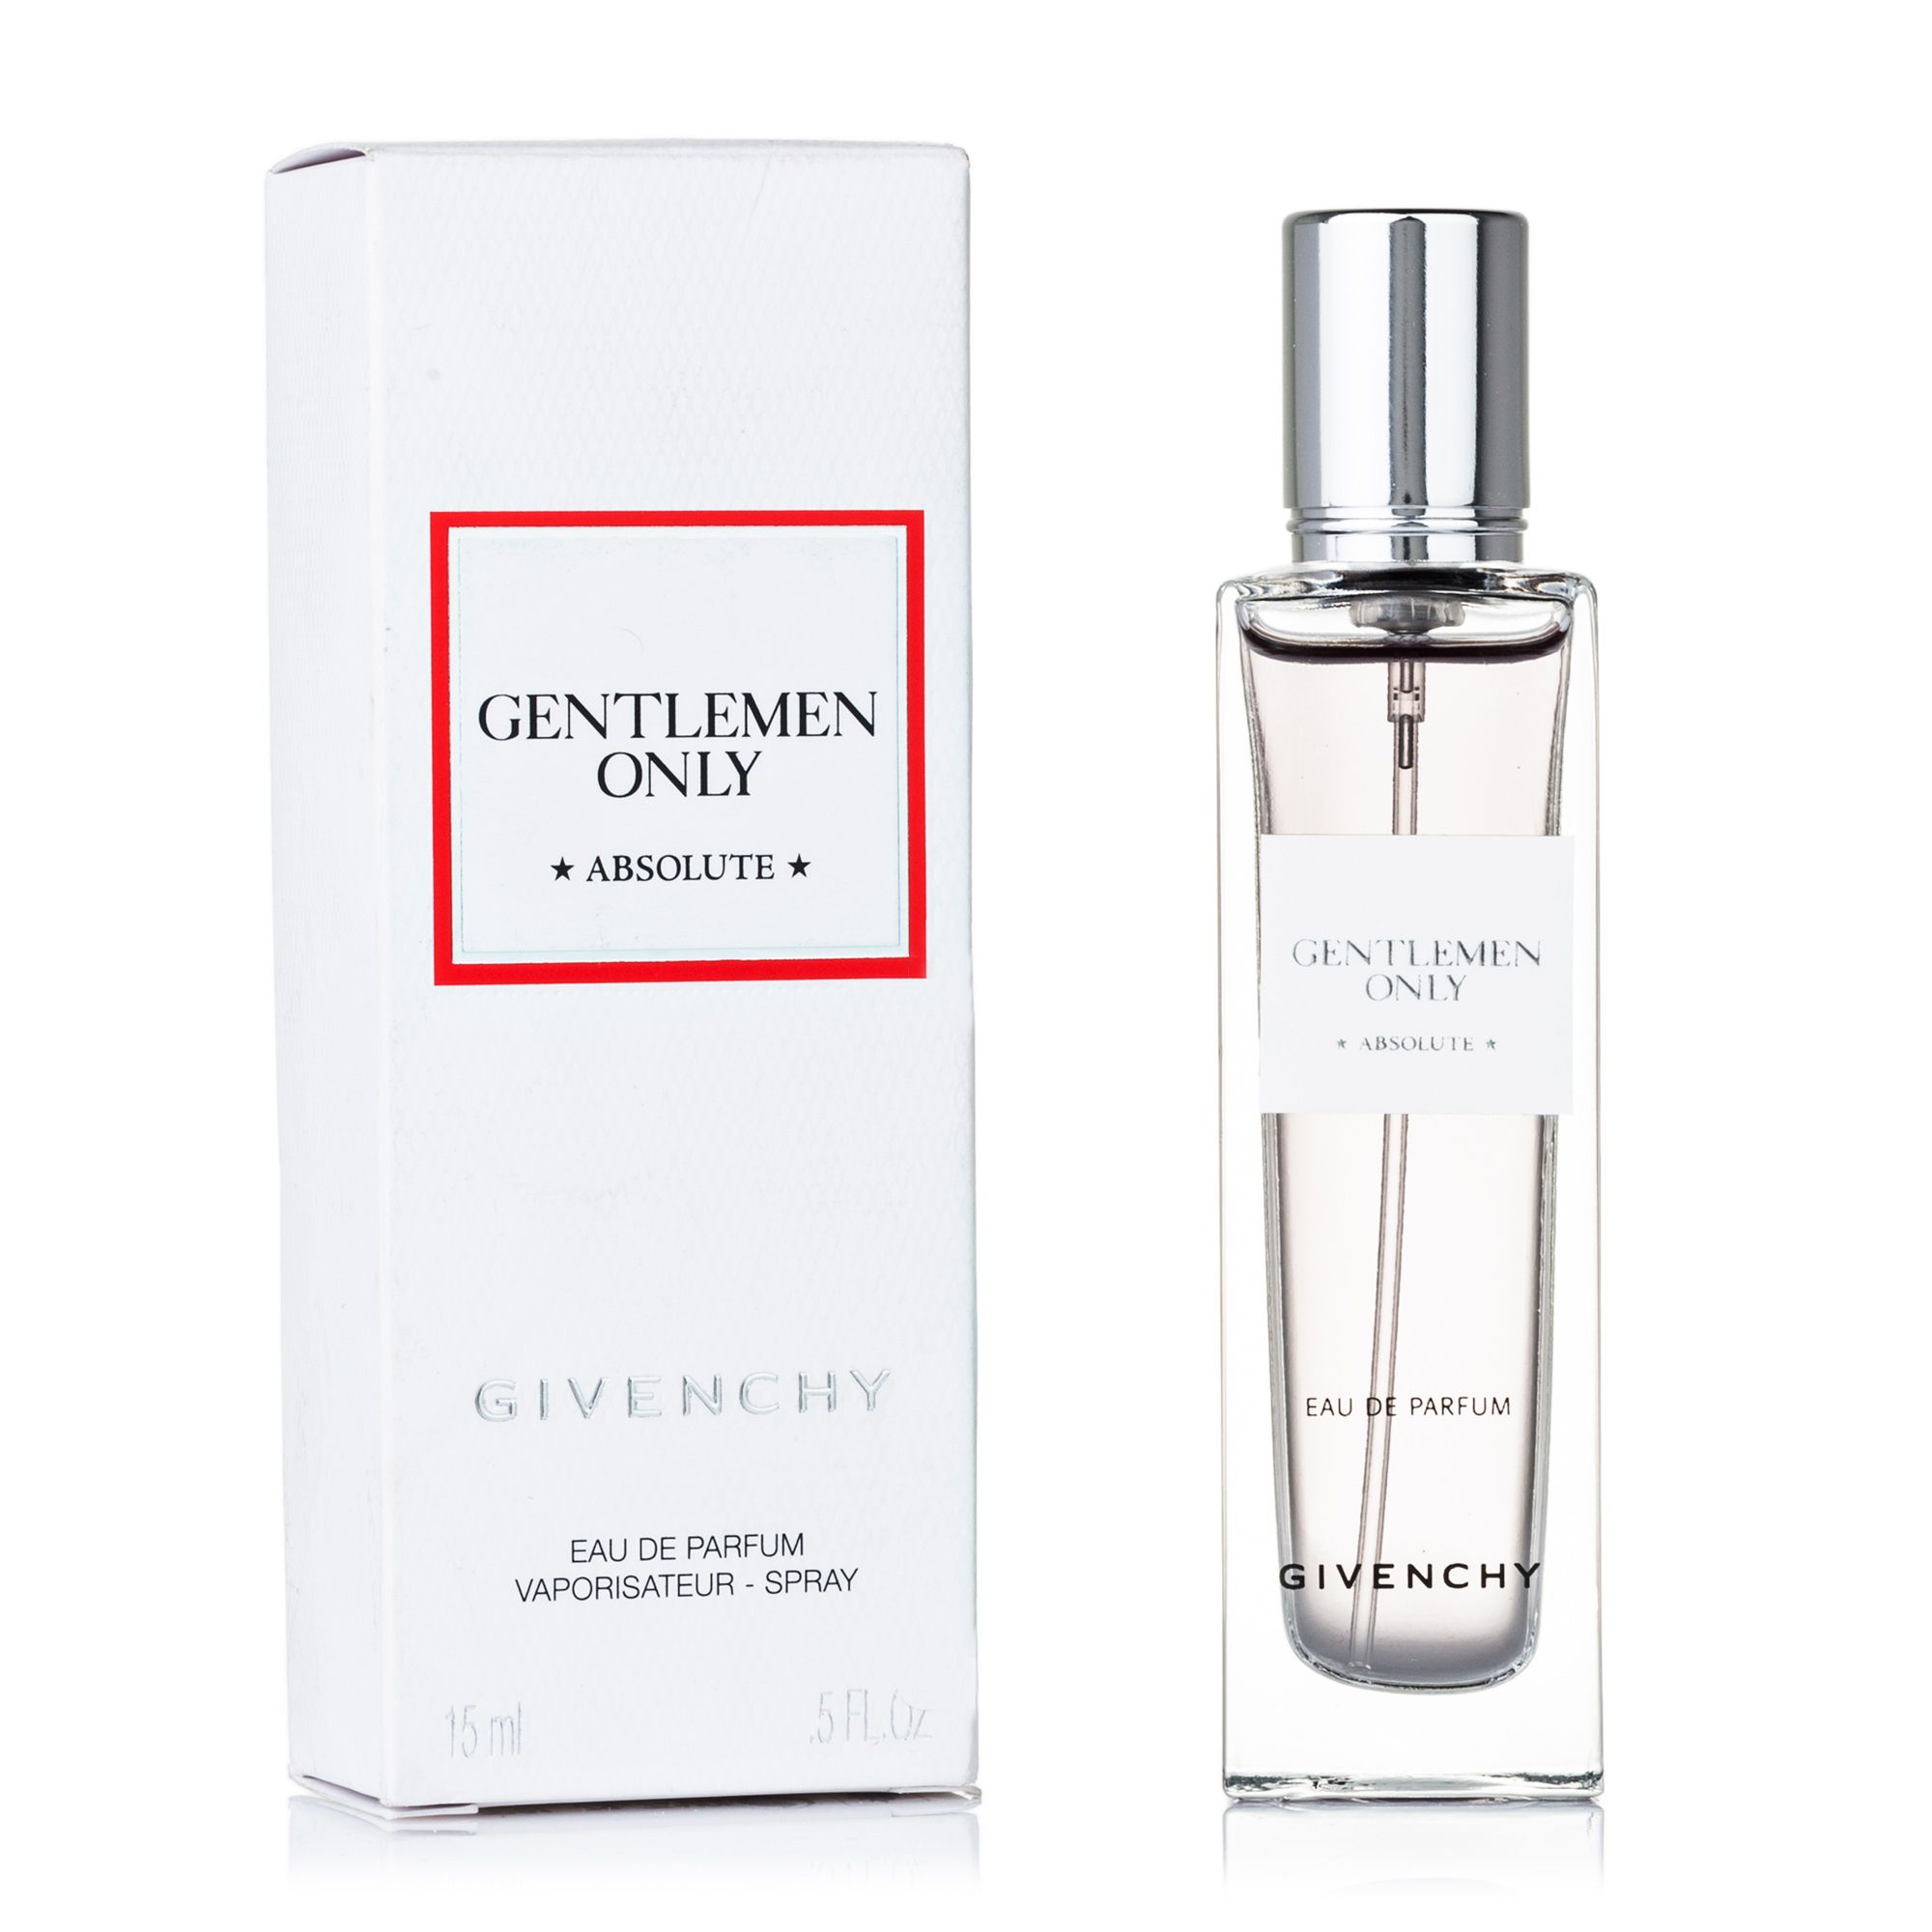 Only absolute. Парфюмерная вода Givenchy Gentlemen only absolute. Мужская парфюмерная вода Gentleman Givenchy. Givenchy only absolute. Живанши Абсолют мужской.